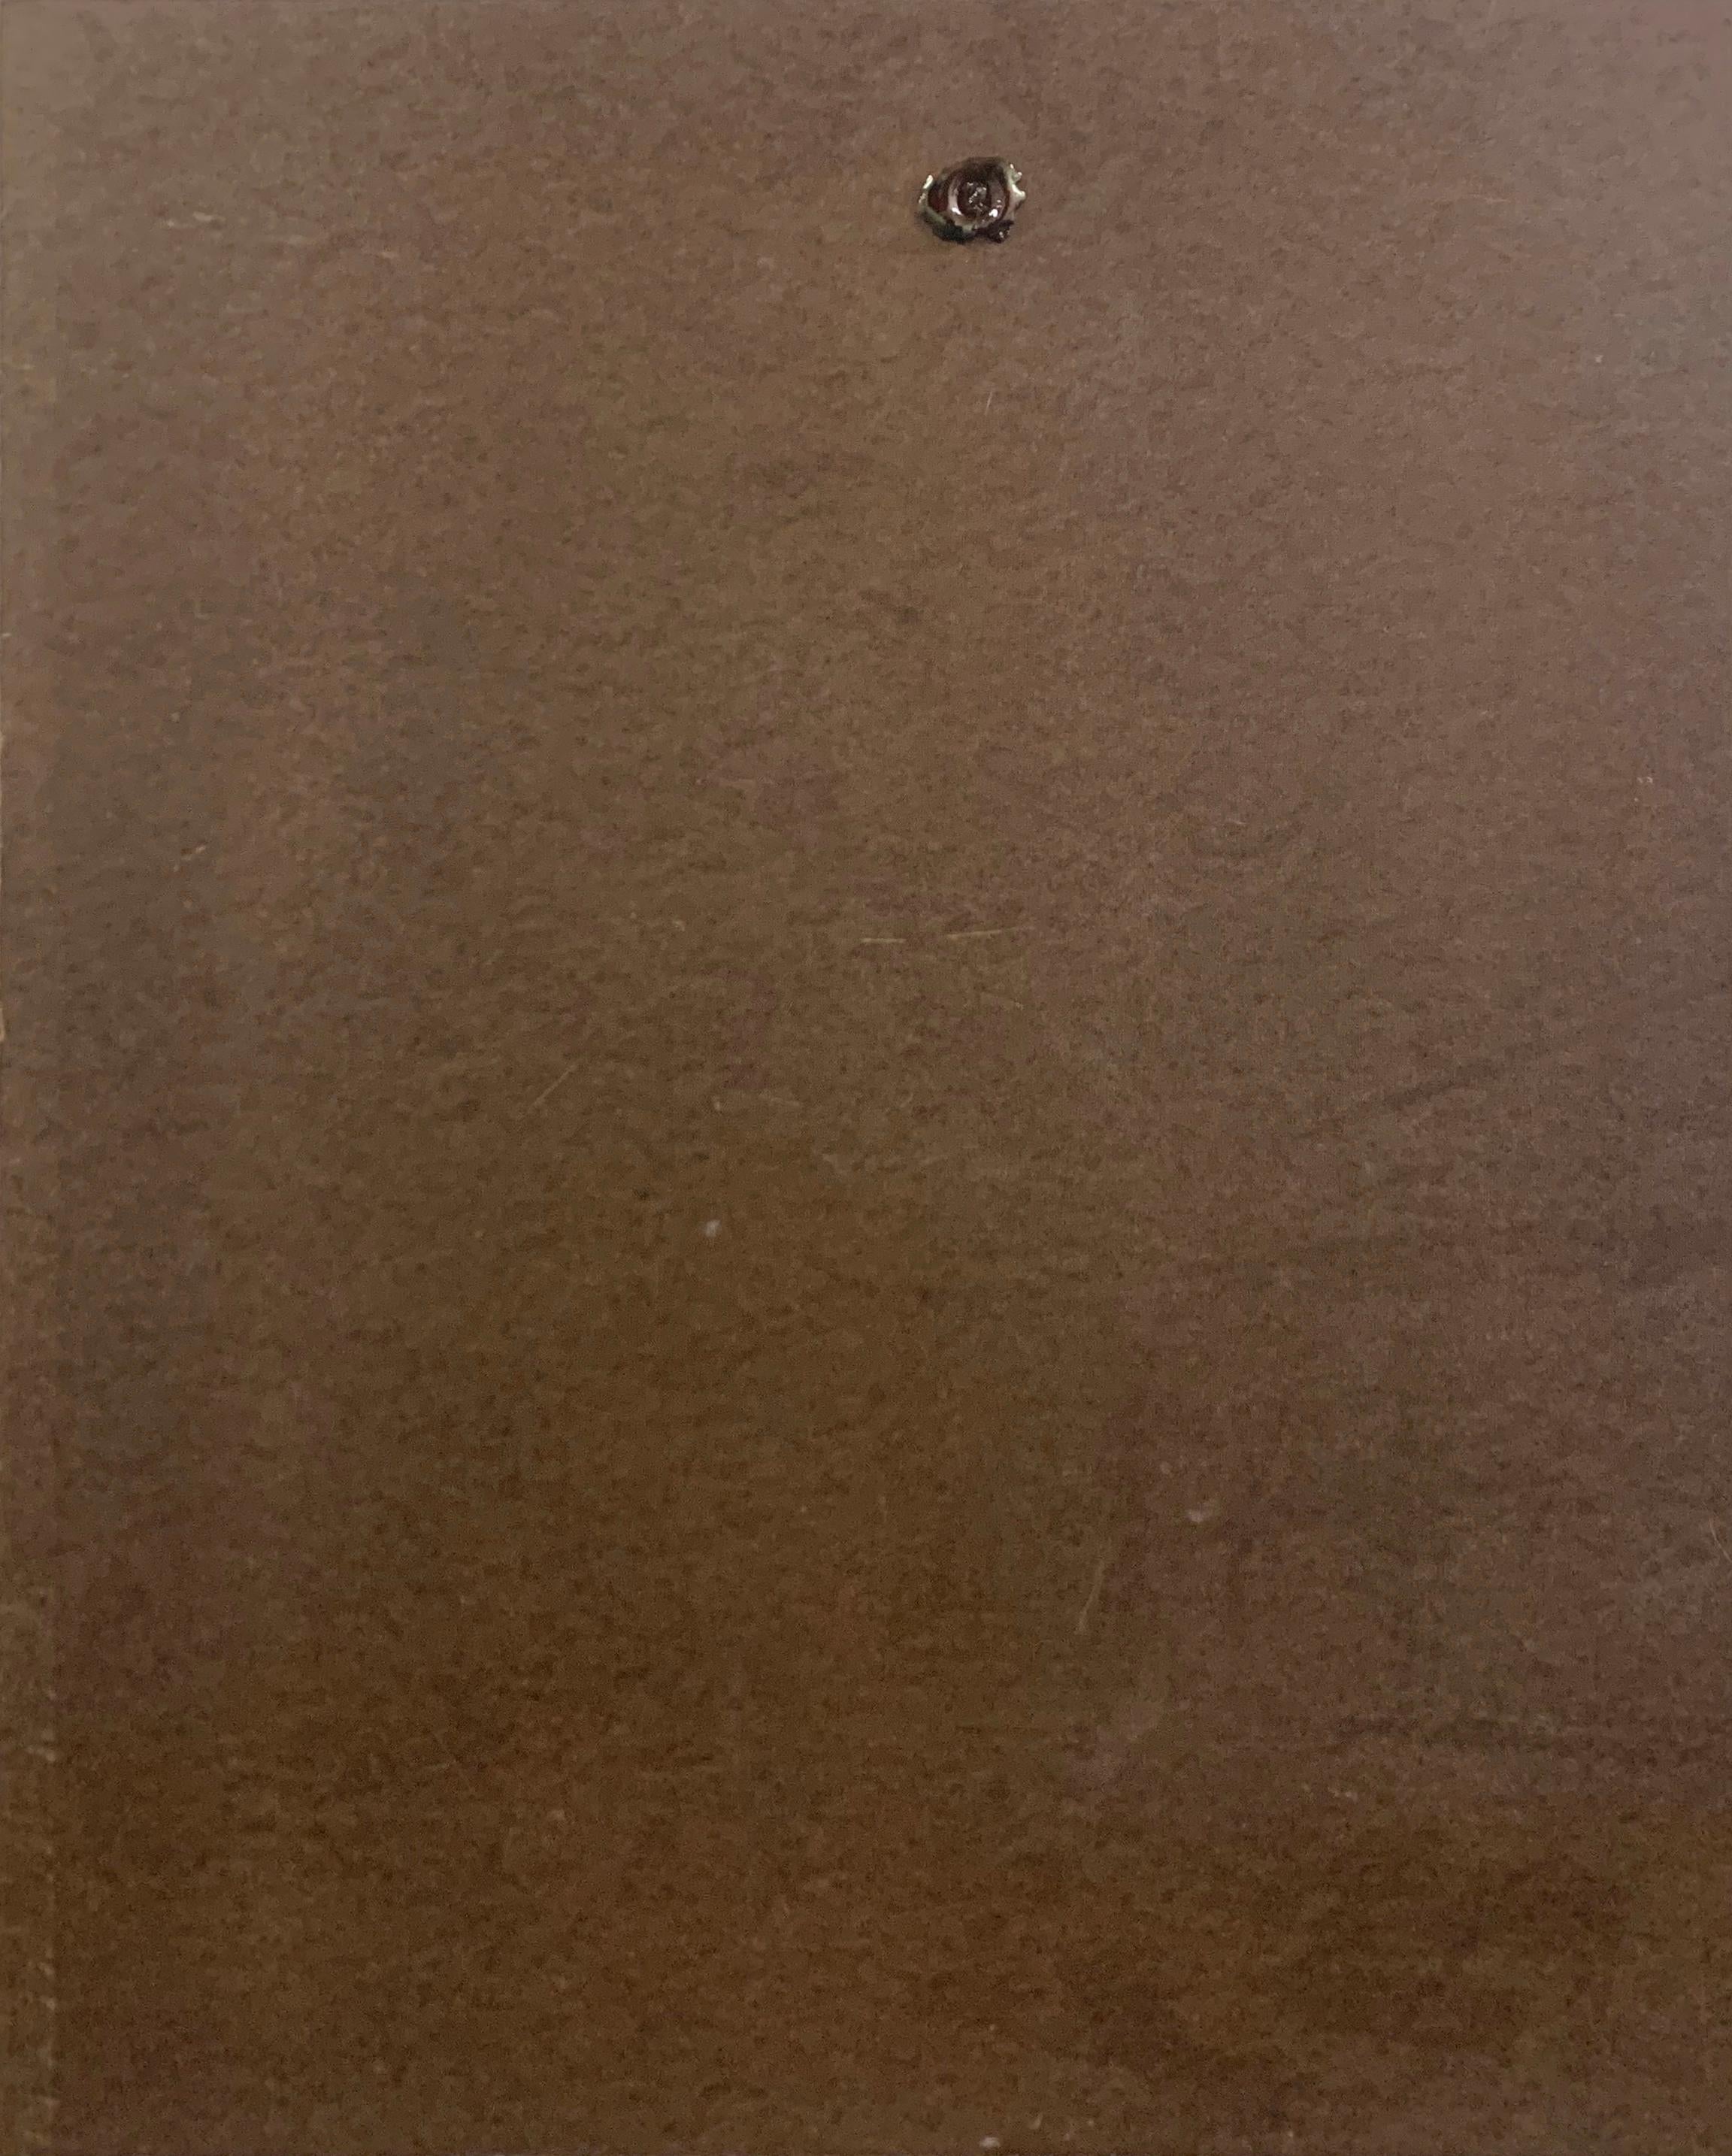 American school, Signed indistinctly lower right and dated 1988.

A bravura, psychologically-penetrating oil study of a man, shown wearing a turban and contrasted against a scumbled saffron and chestnut background. 

